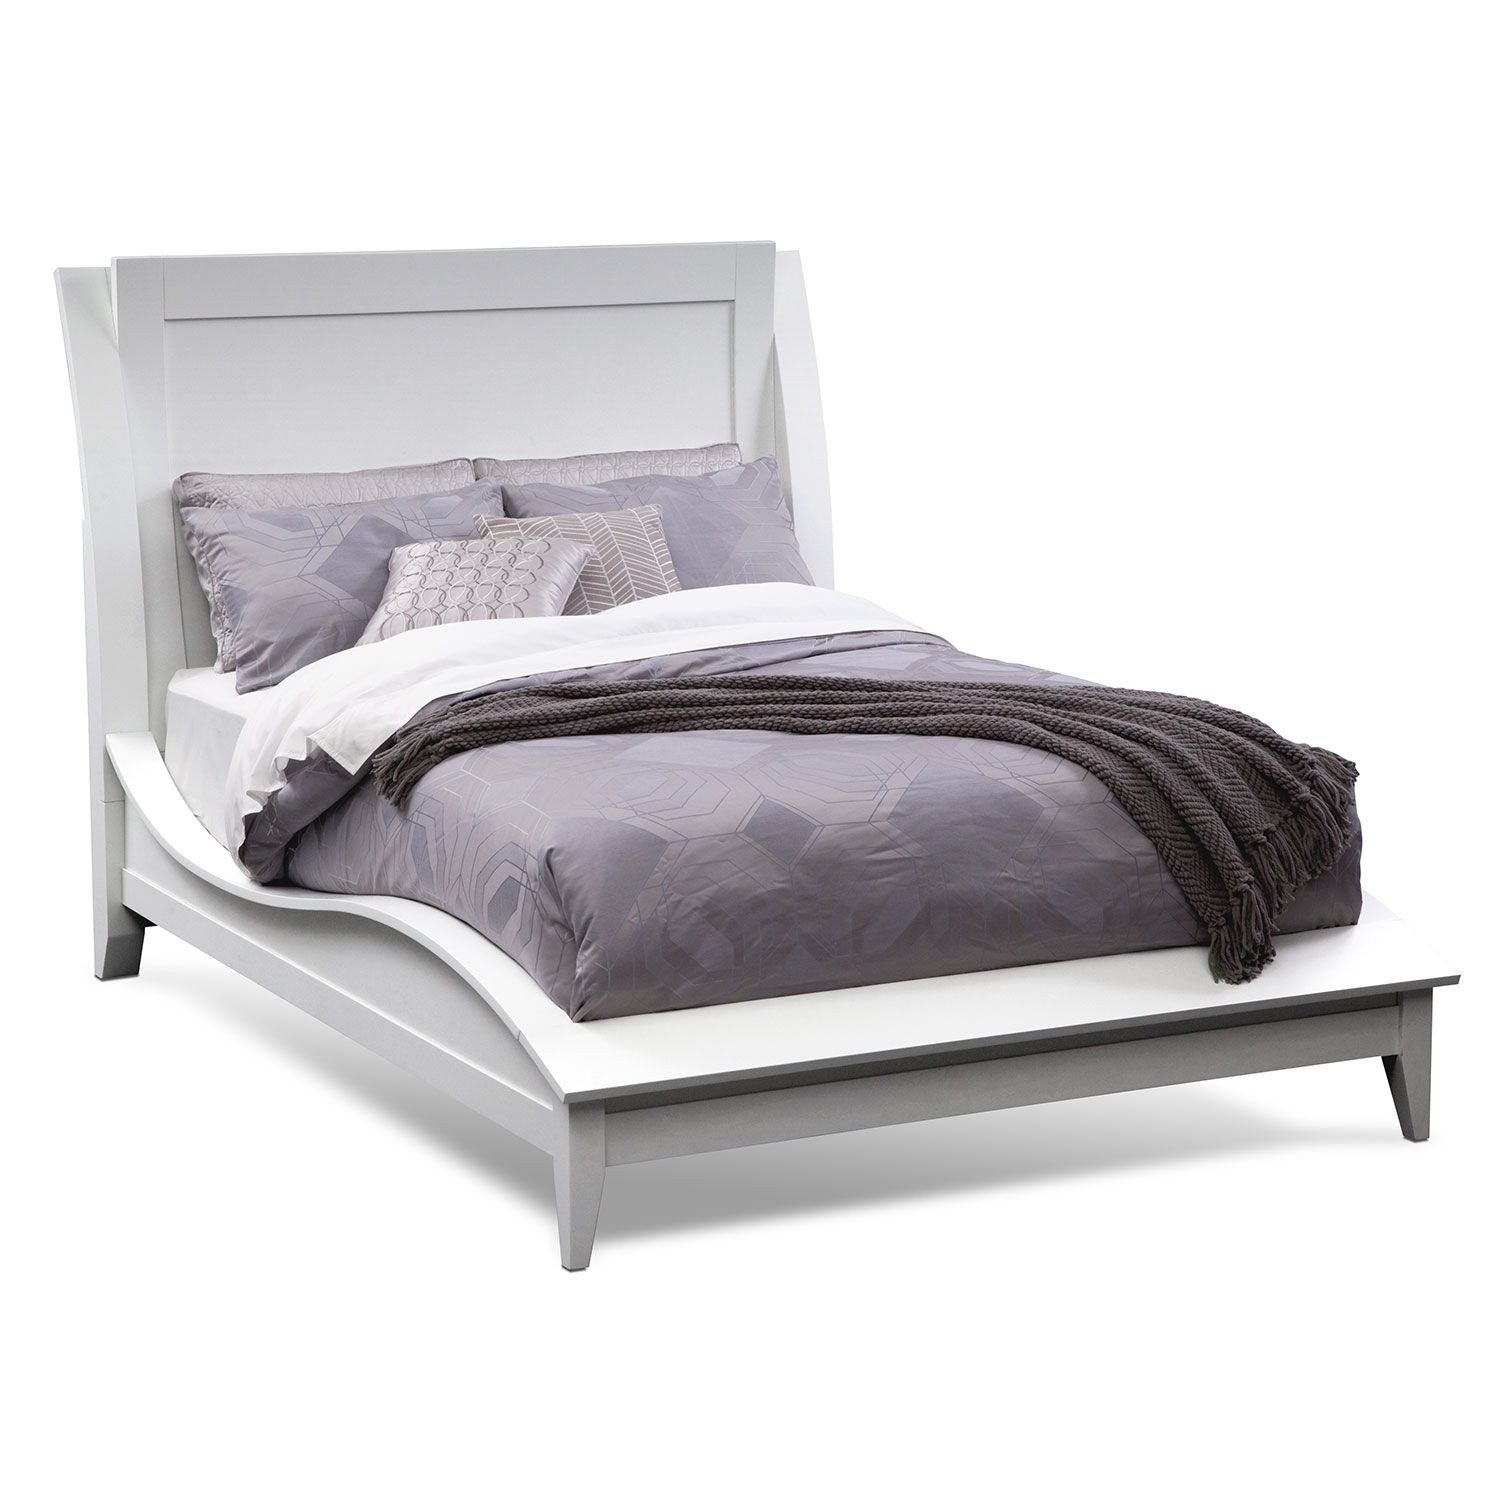 Value City Bedroom Furniture Inspirational Bedroom Furniture Cascade White Queen Bed